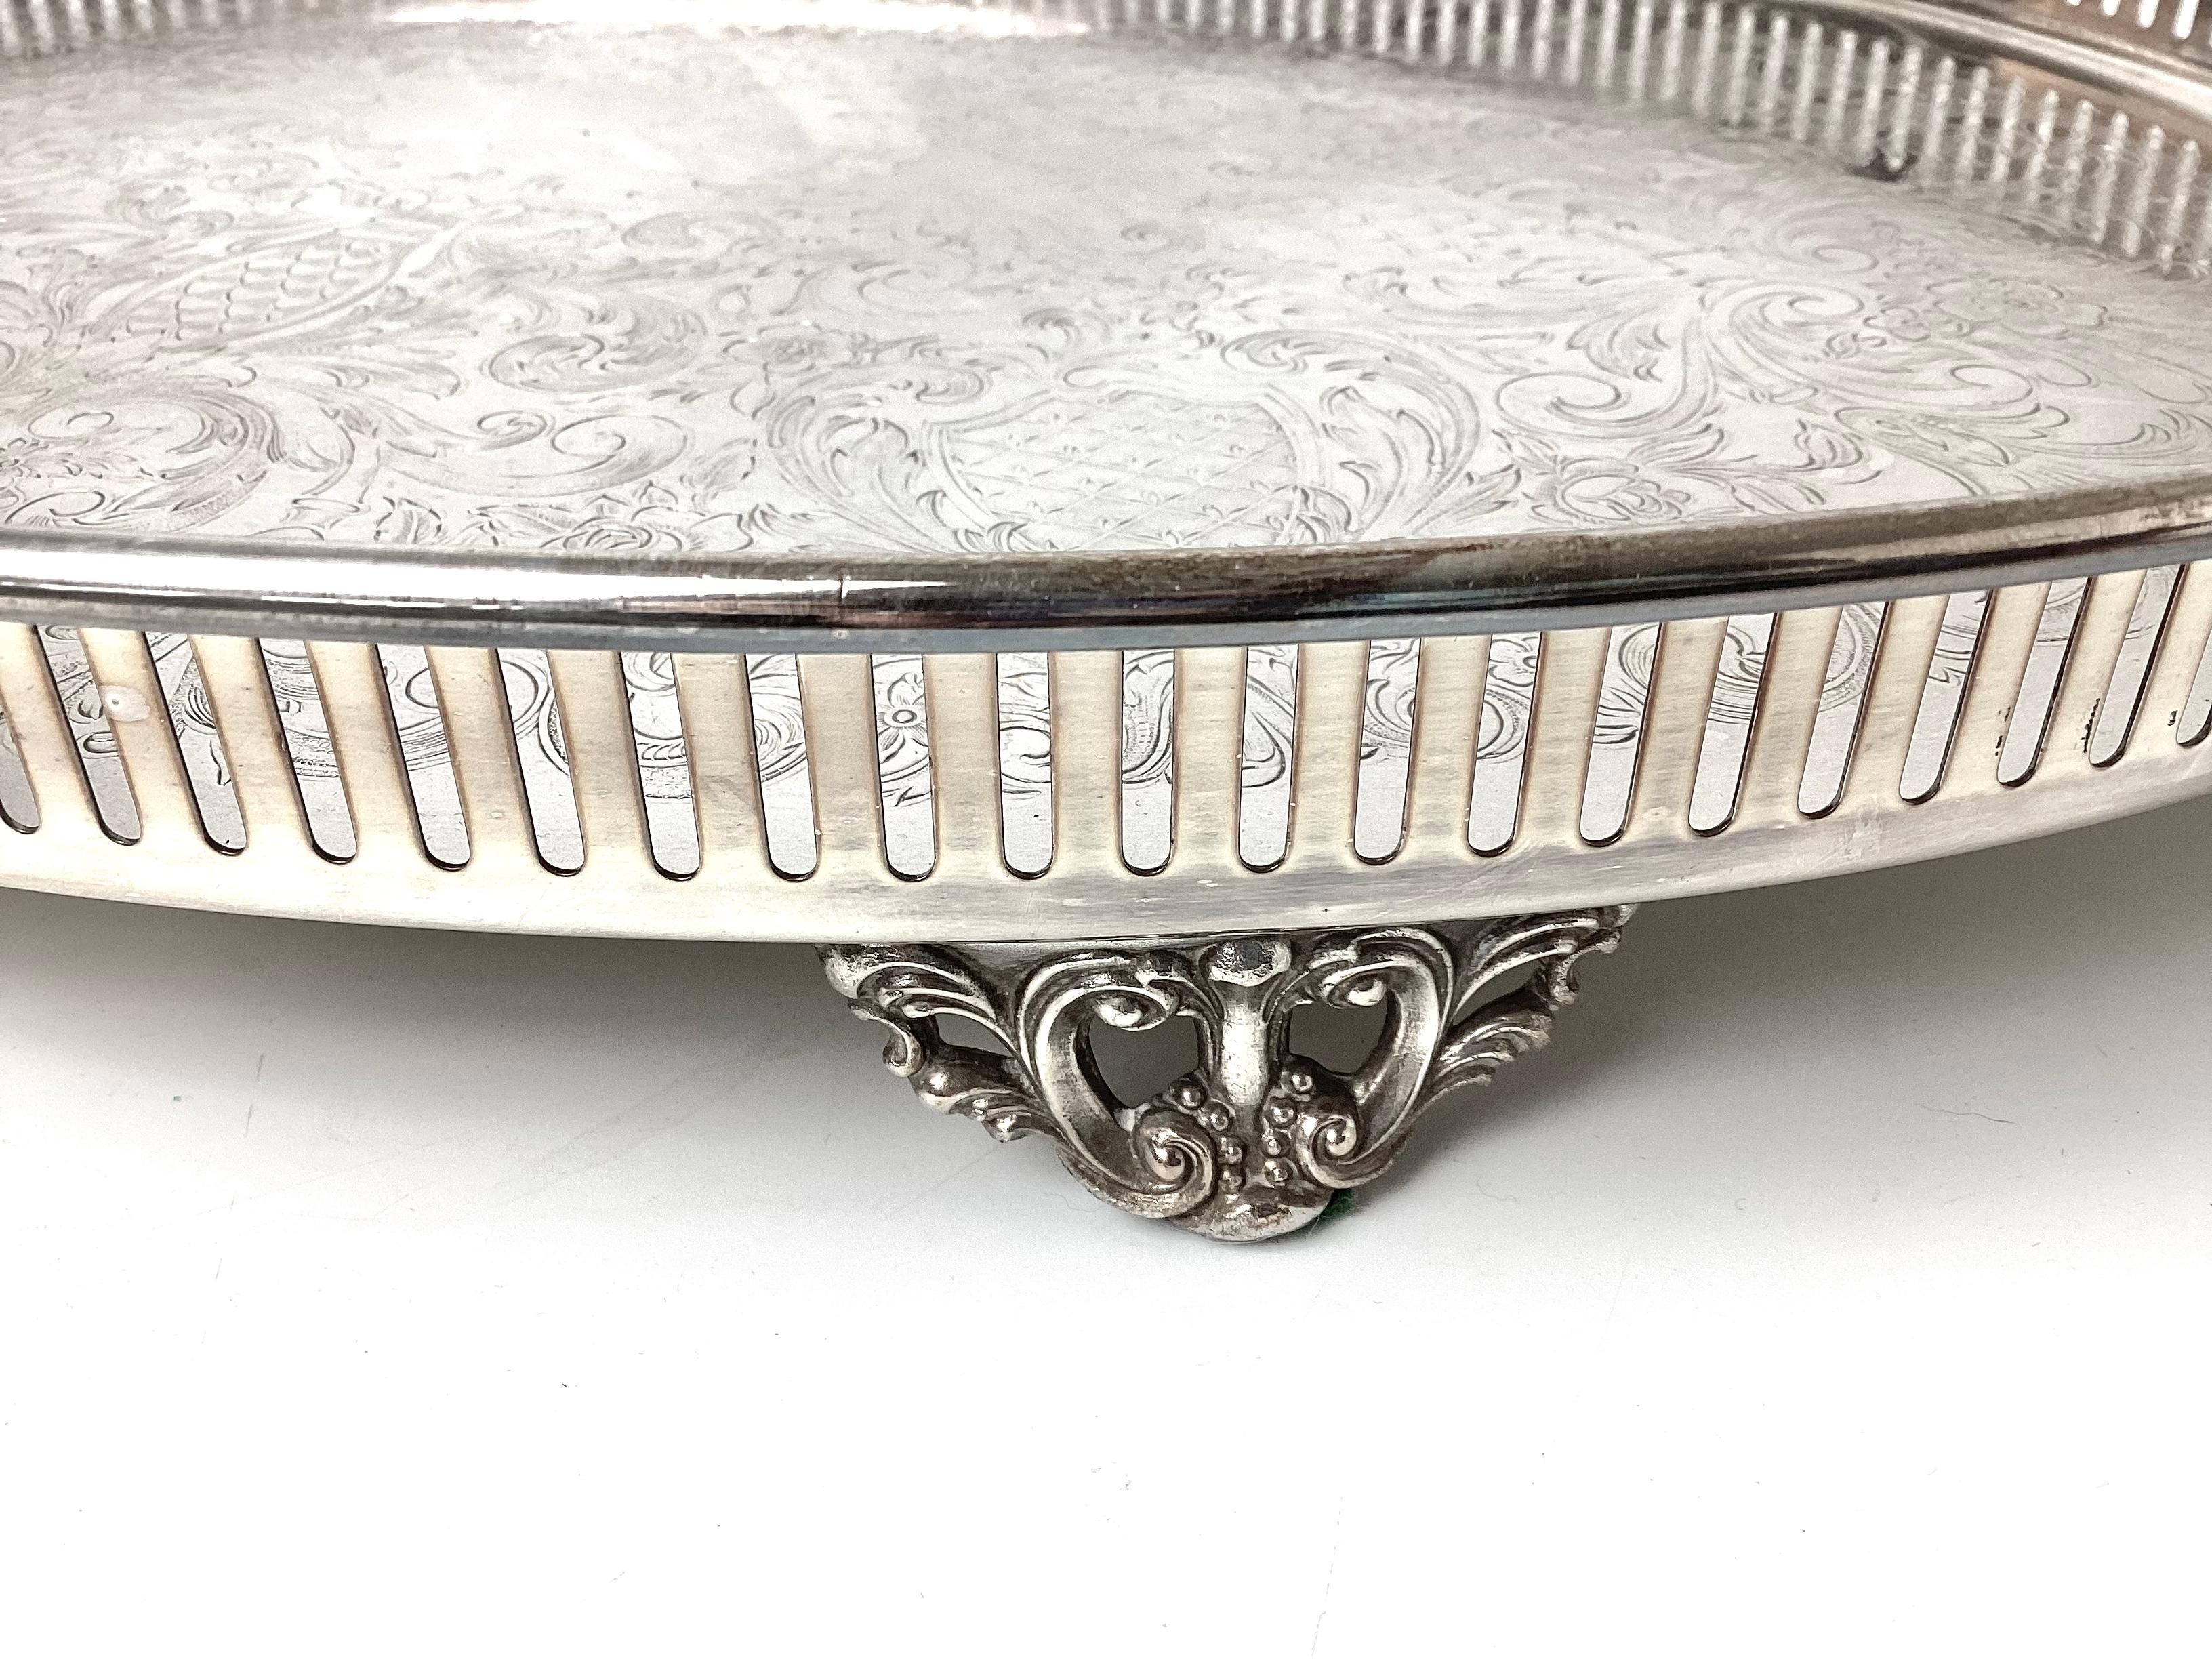 queen anne silver plated tableware made in england